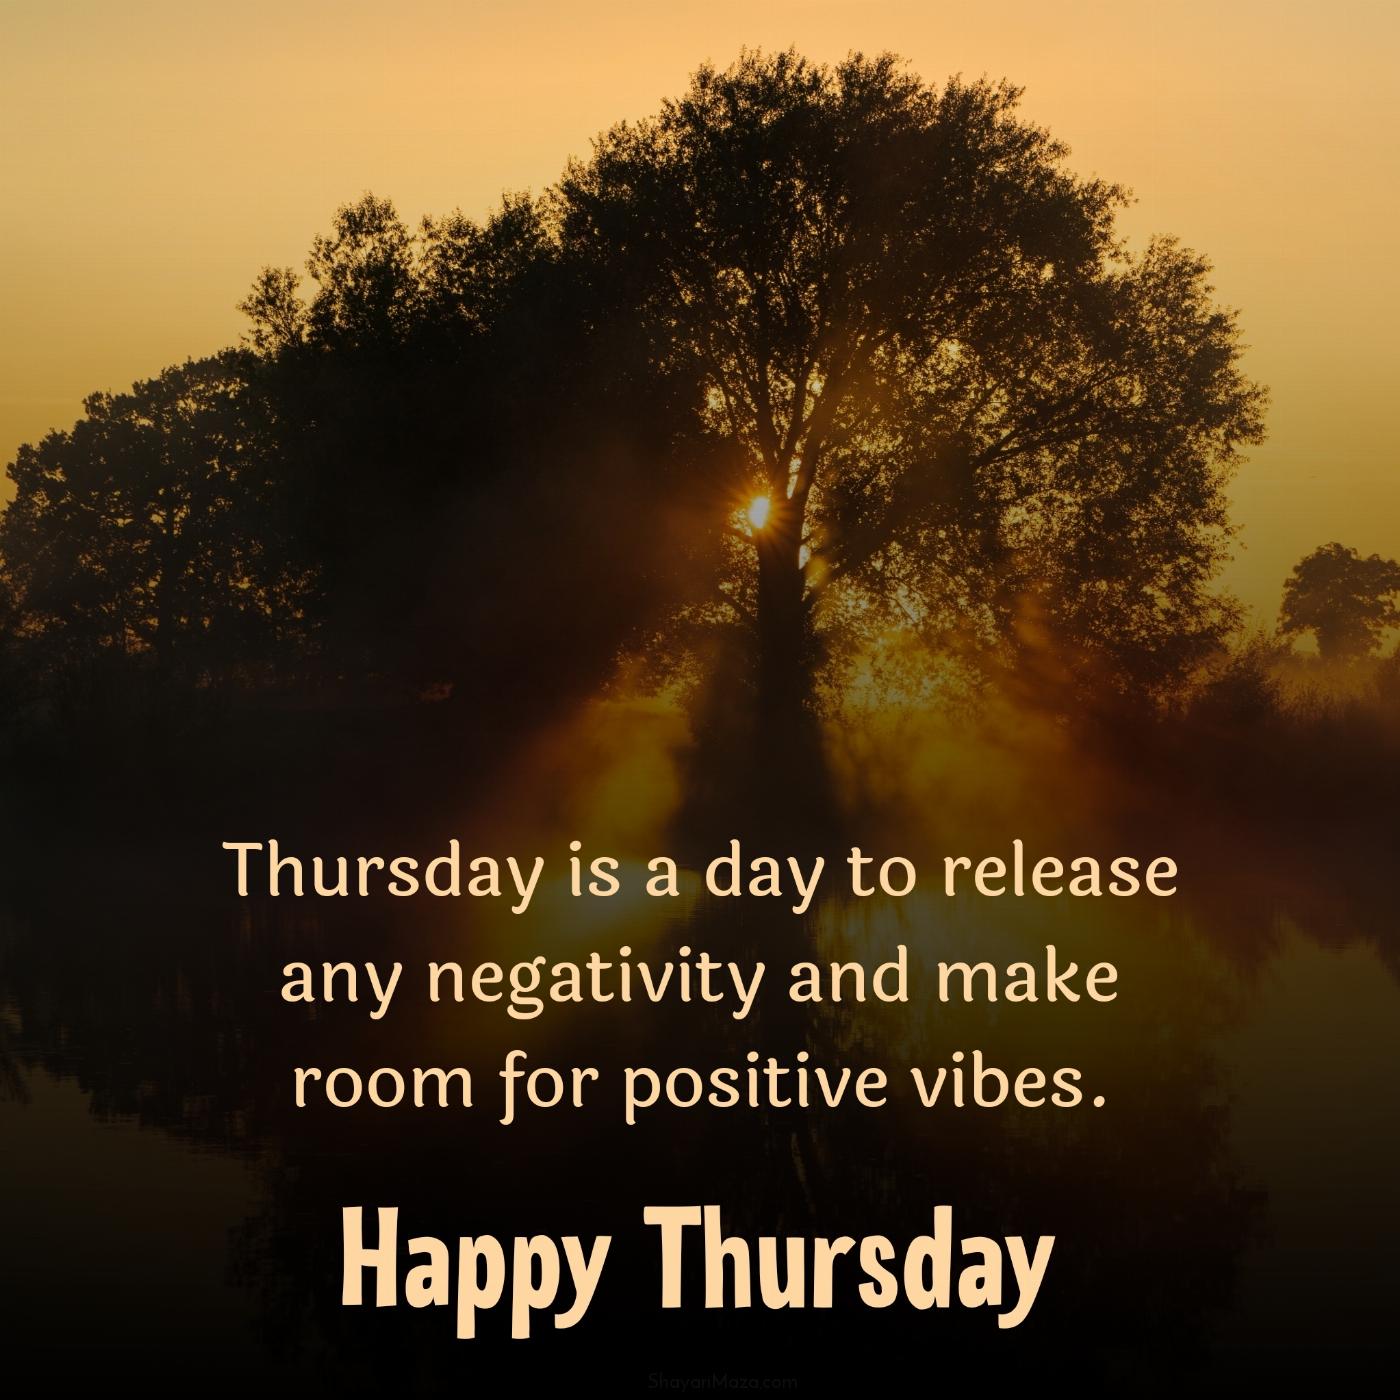 Thursday is a day to release any negativity